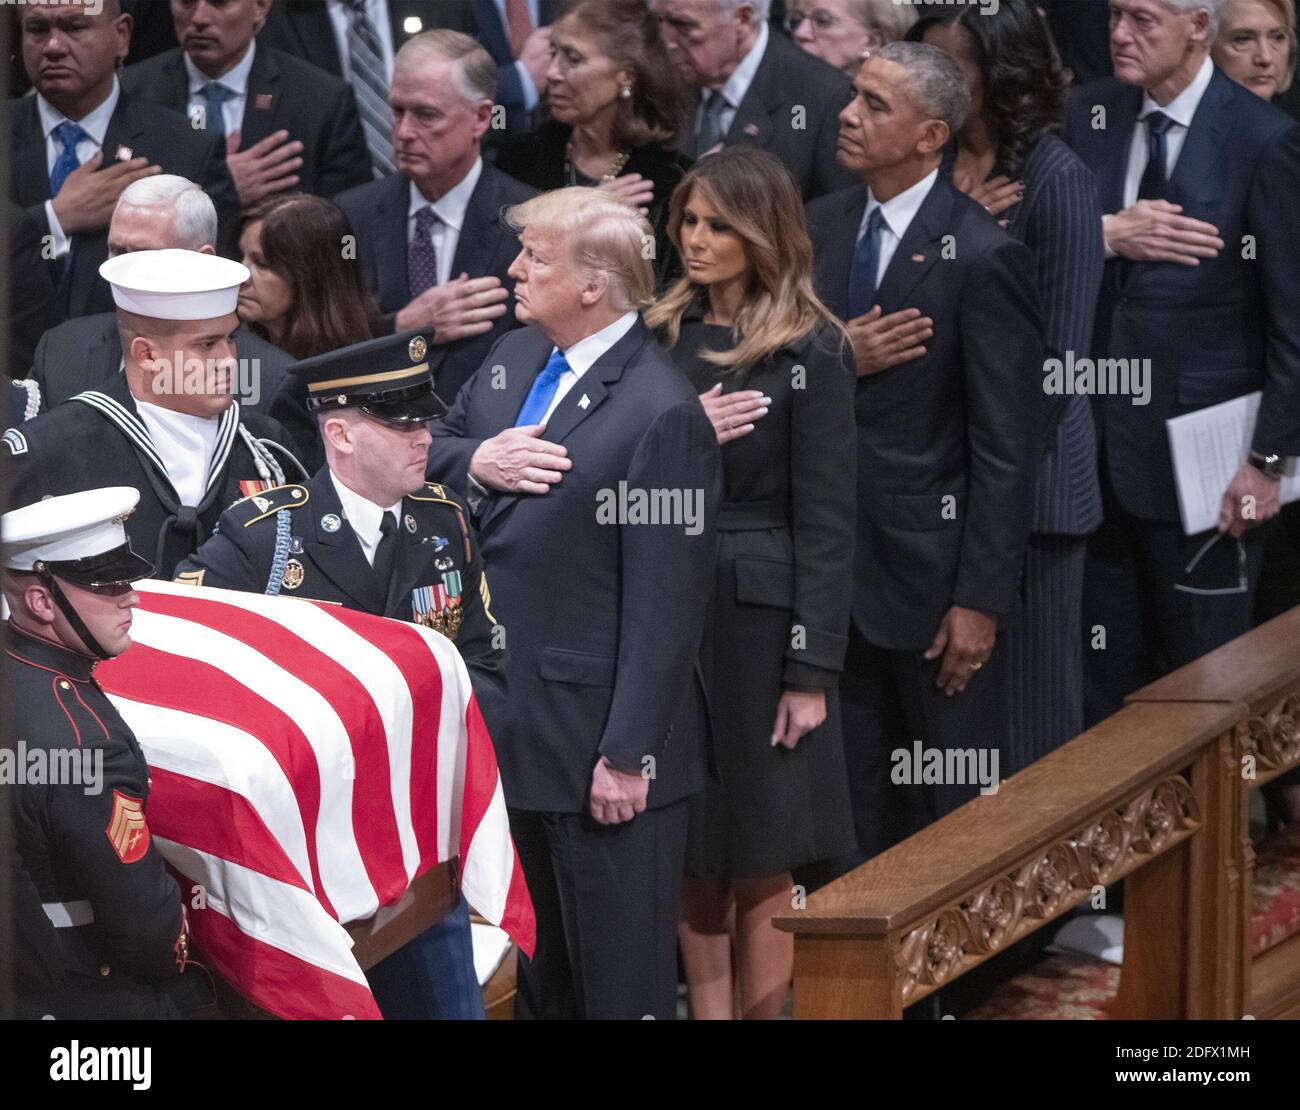 Dignitaries pay their respects as the casket containing the remains of the late former United States President George H.W. Bush at the National funeral service in his honor at the Washington National Cathedral in Washington, DC on Wednesday, December 5, 2018. Front row: United States President Donald J. Trump, first lady Melania Trump, former US President Barack Obama, and former US President Bill Clinton. Second row: former US Vice President Dan Quayle and Marilyn Quayle. Photo by Ron Sachs / CNP/ABACAPRESS.COM Stock Photo